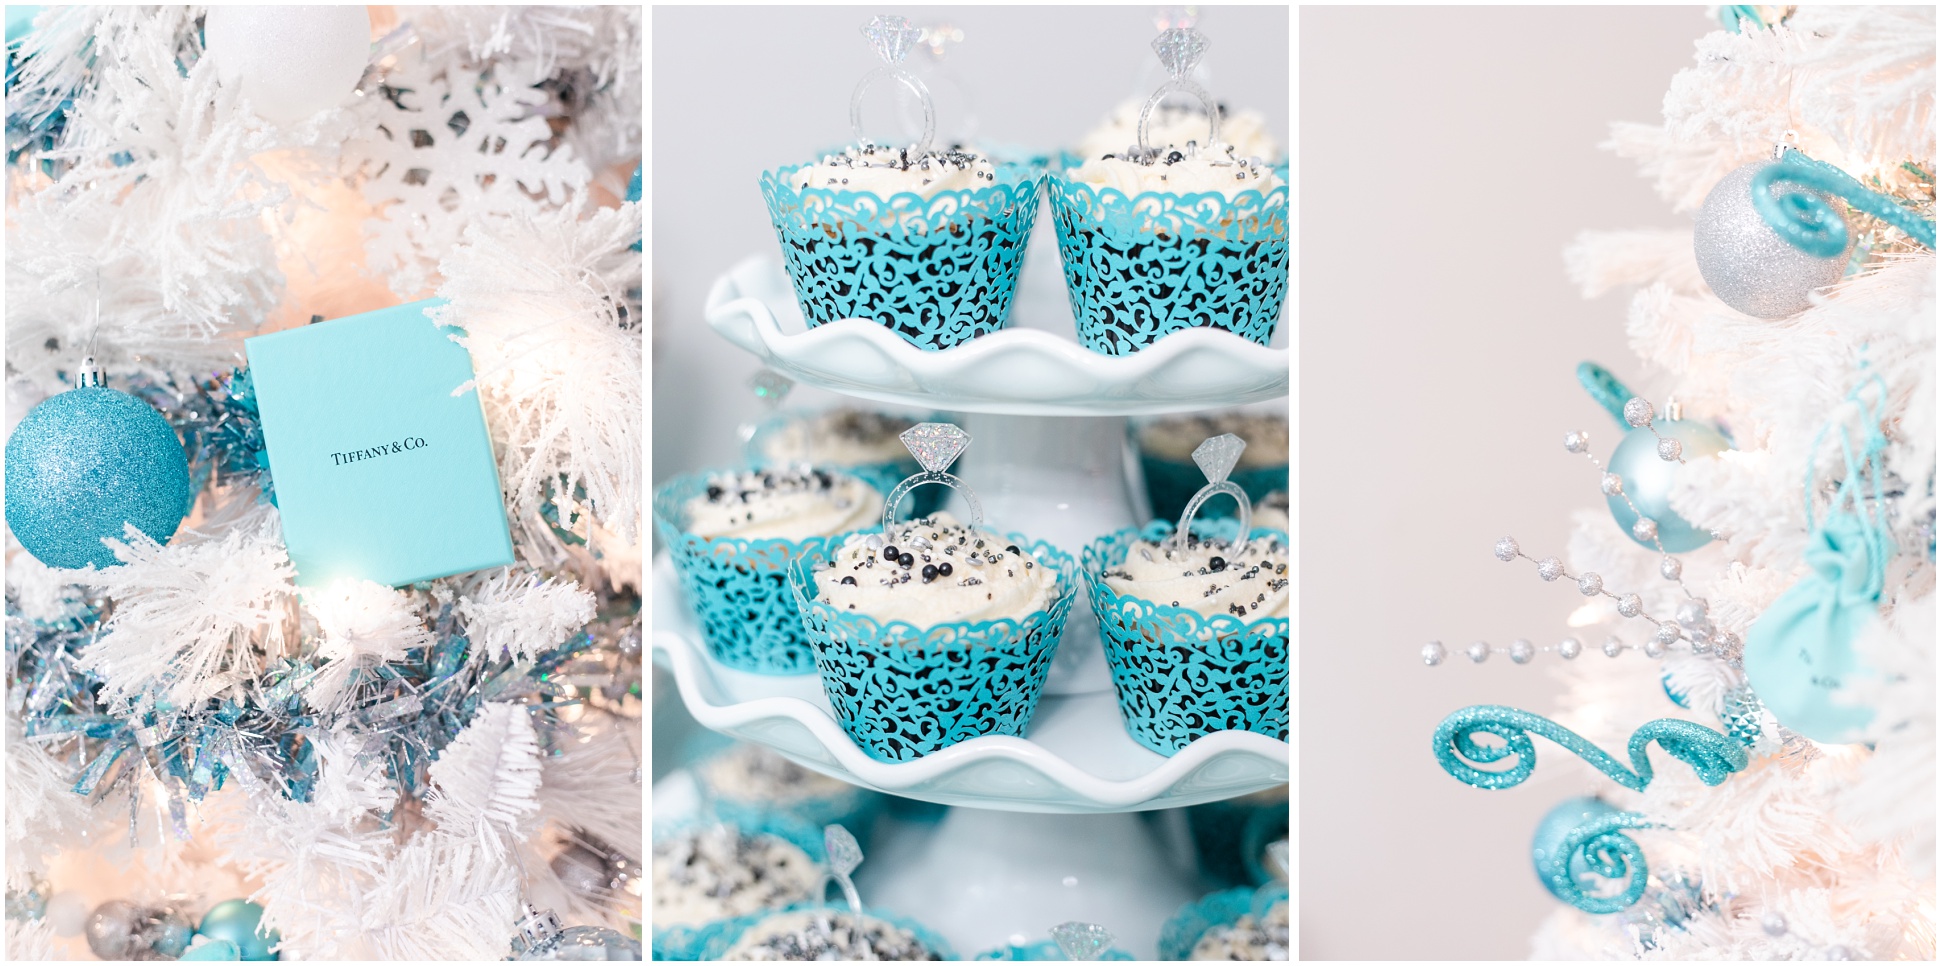 blue Tiffany & Co box against white Christmas tree; Chocolate cupcakes with Tiffany blue wrappers and clear decorative diamond rings; white Christmas tree with Tiffany blue decorations 